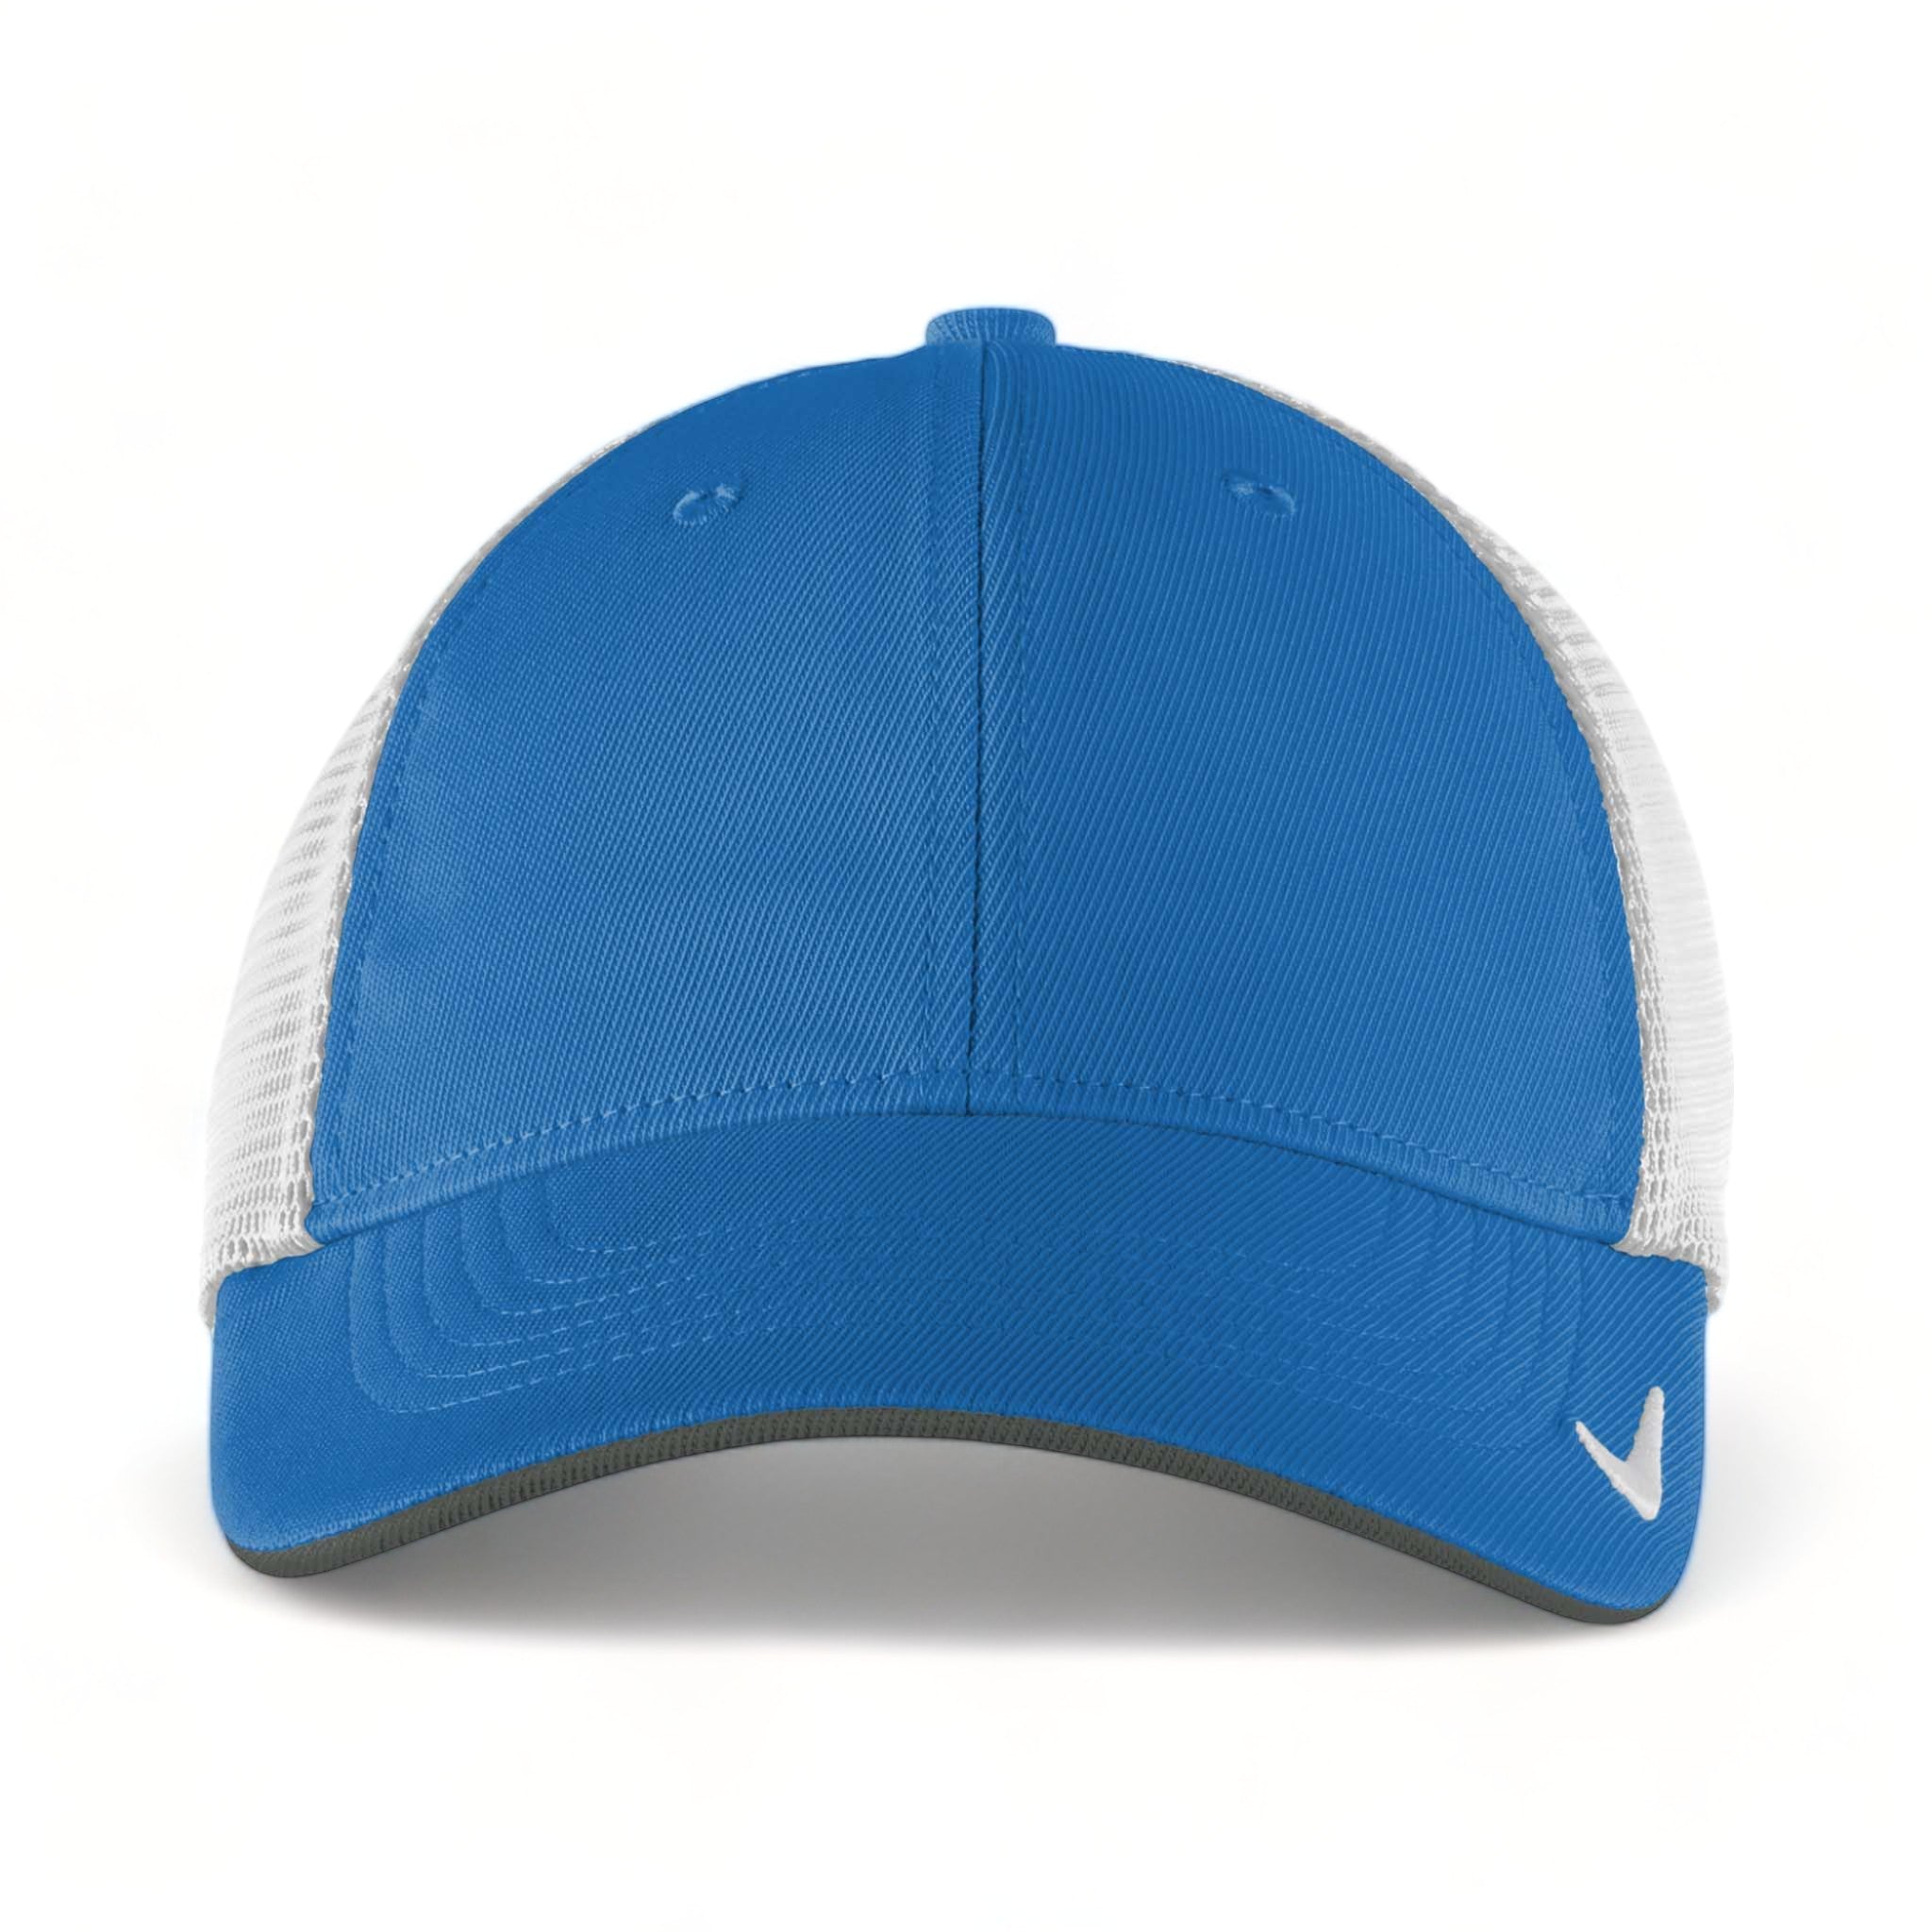 Front view of Nike NKFB6448 custom hat in gym blue and white